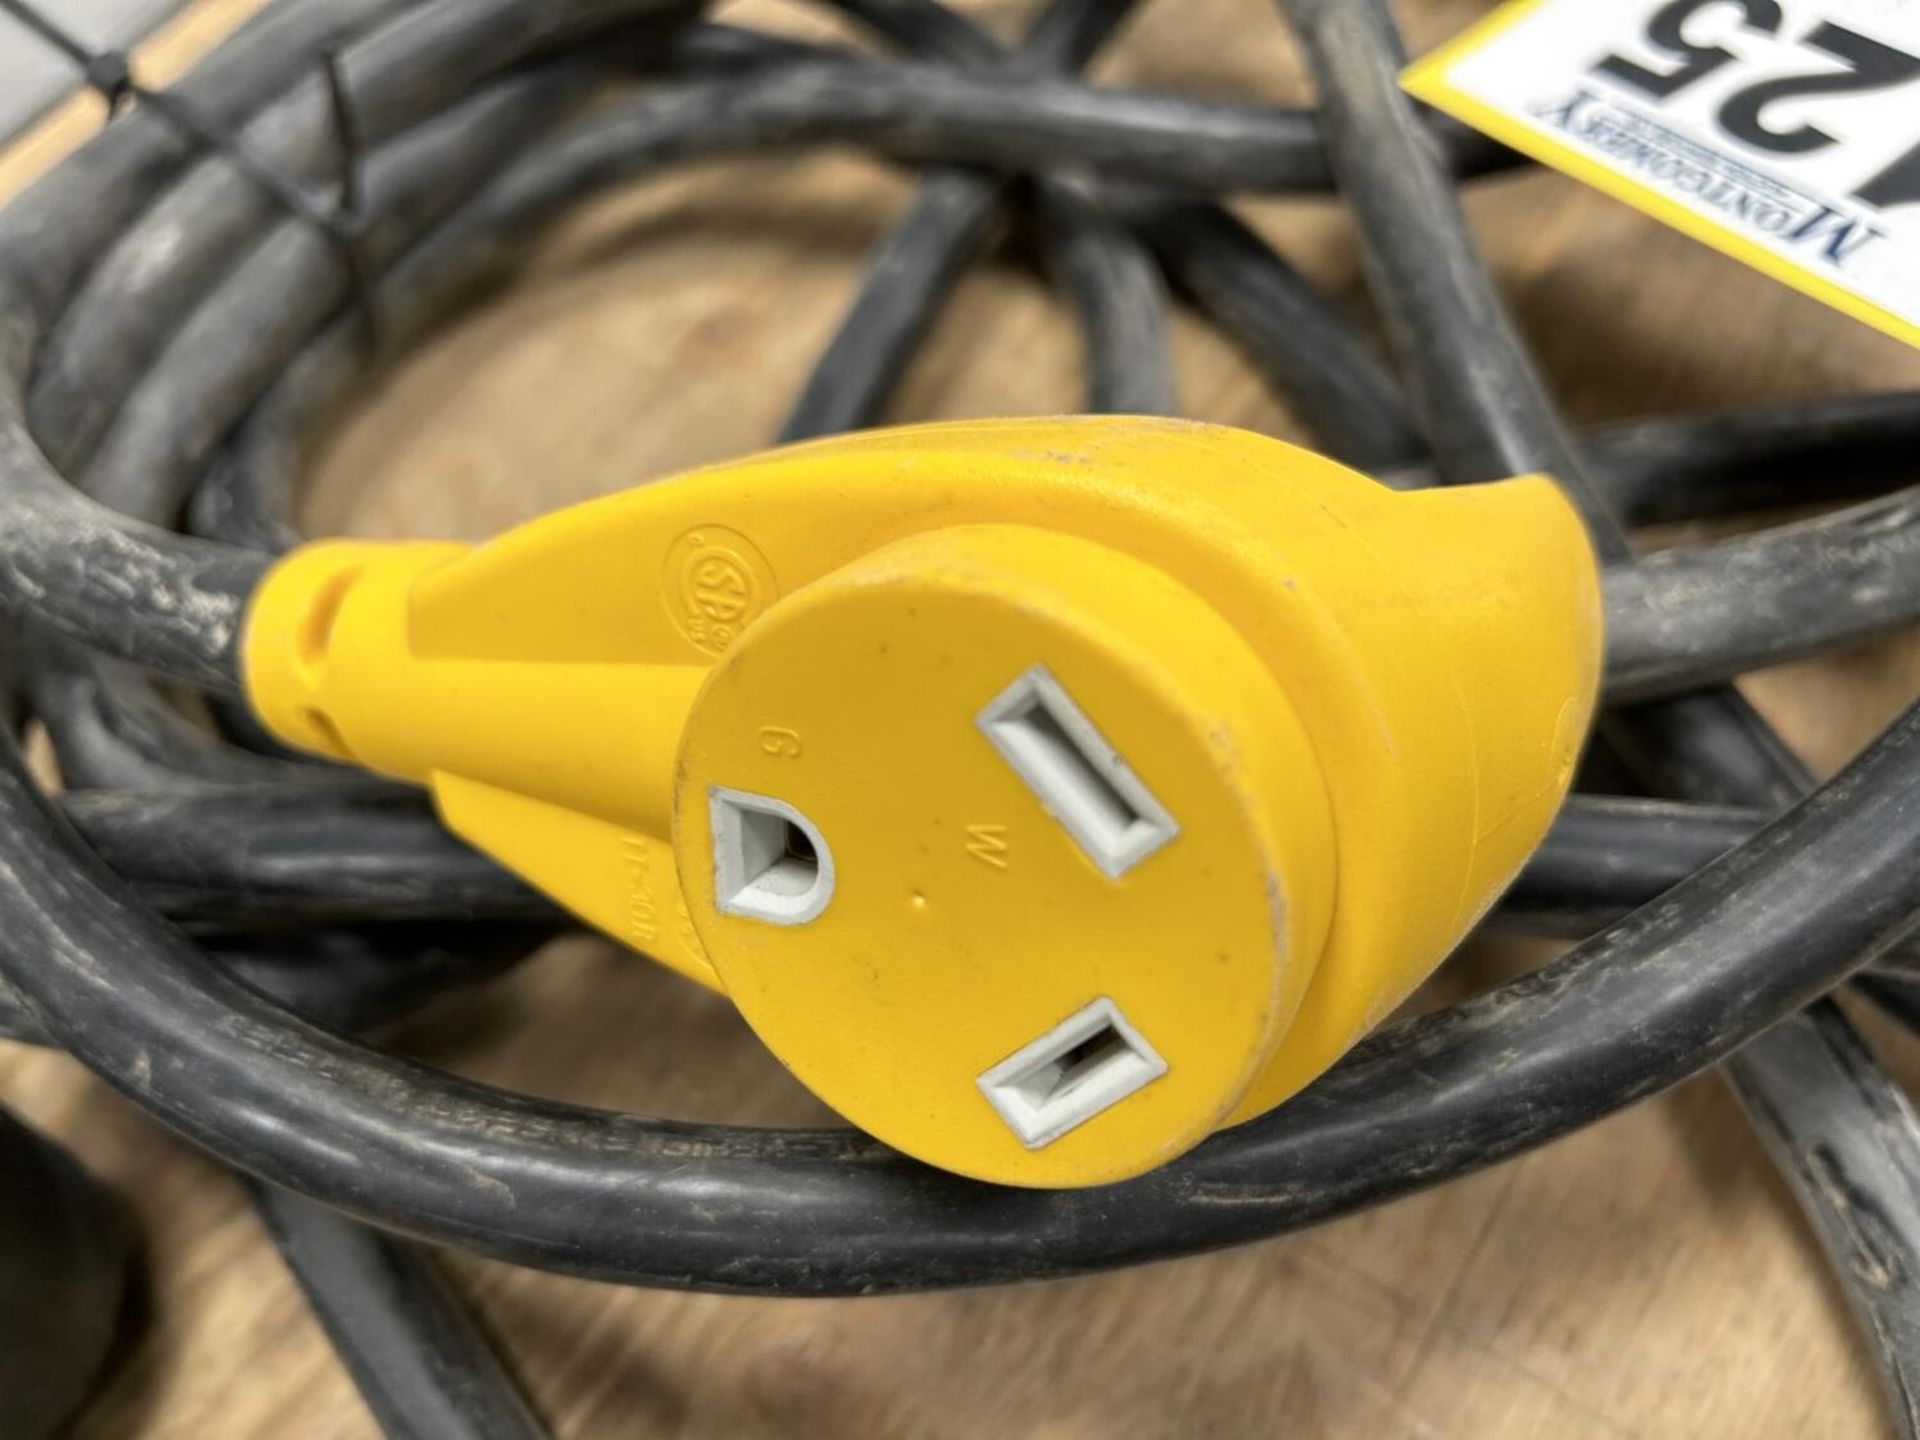 30 AMP POWER CORD - Image 3 of 3